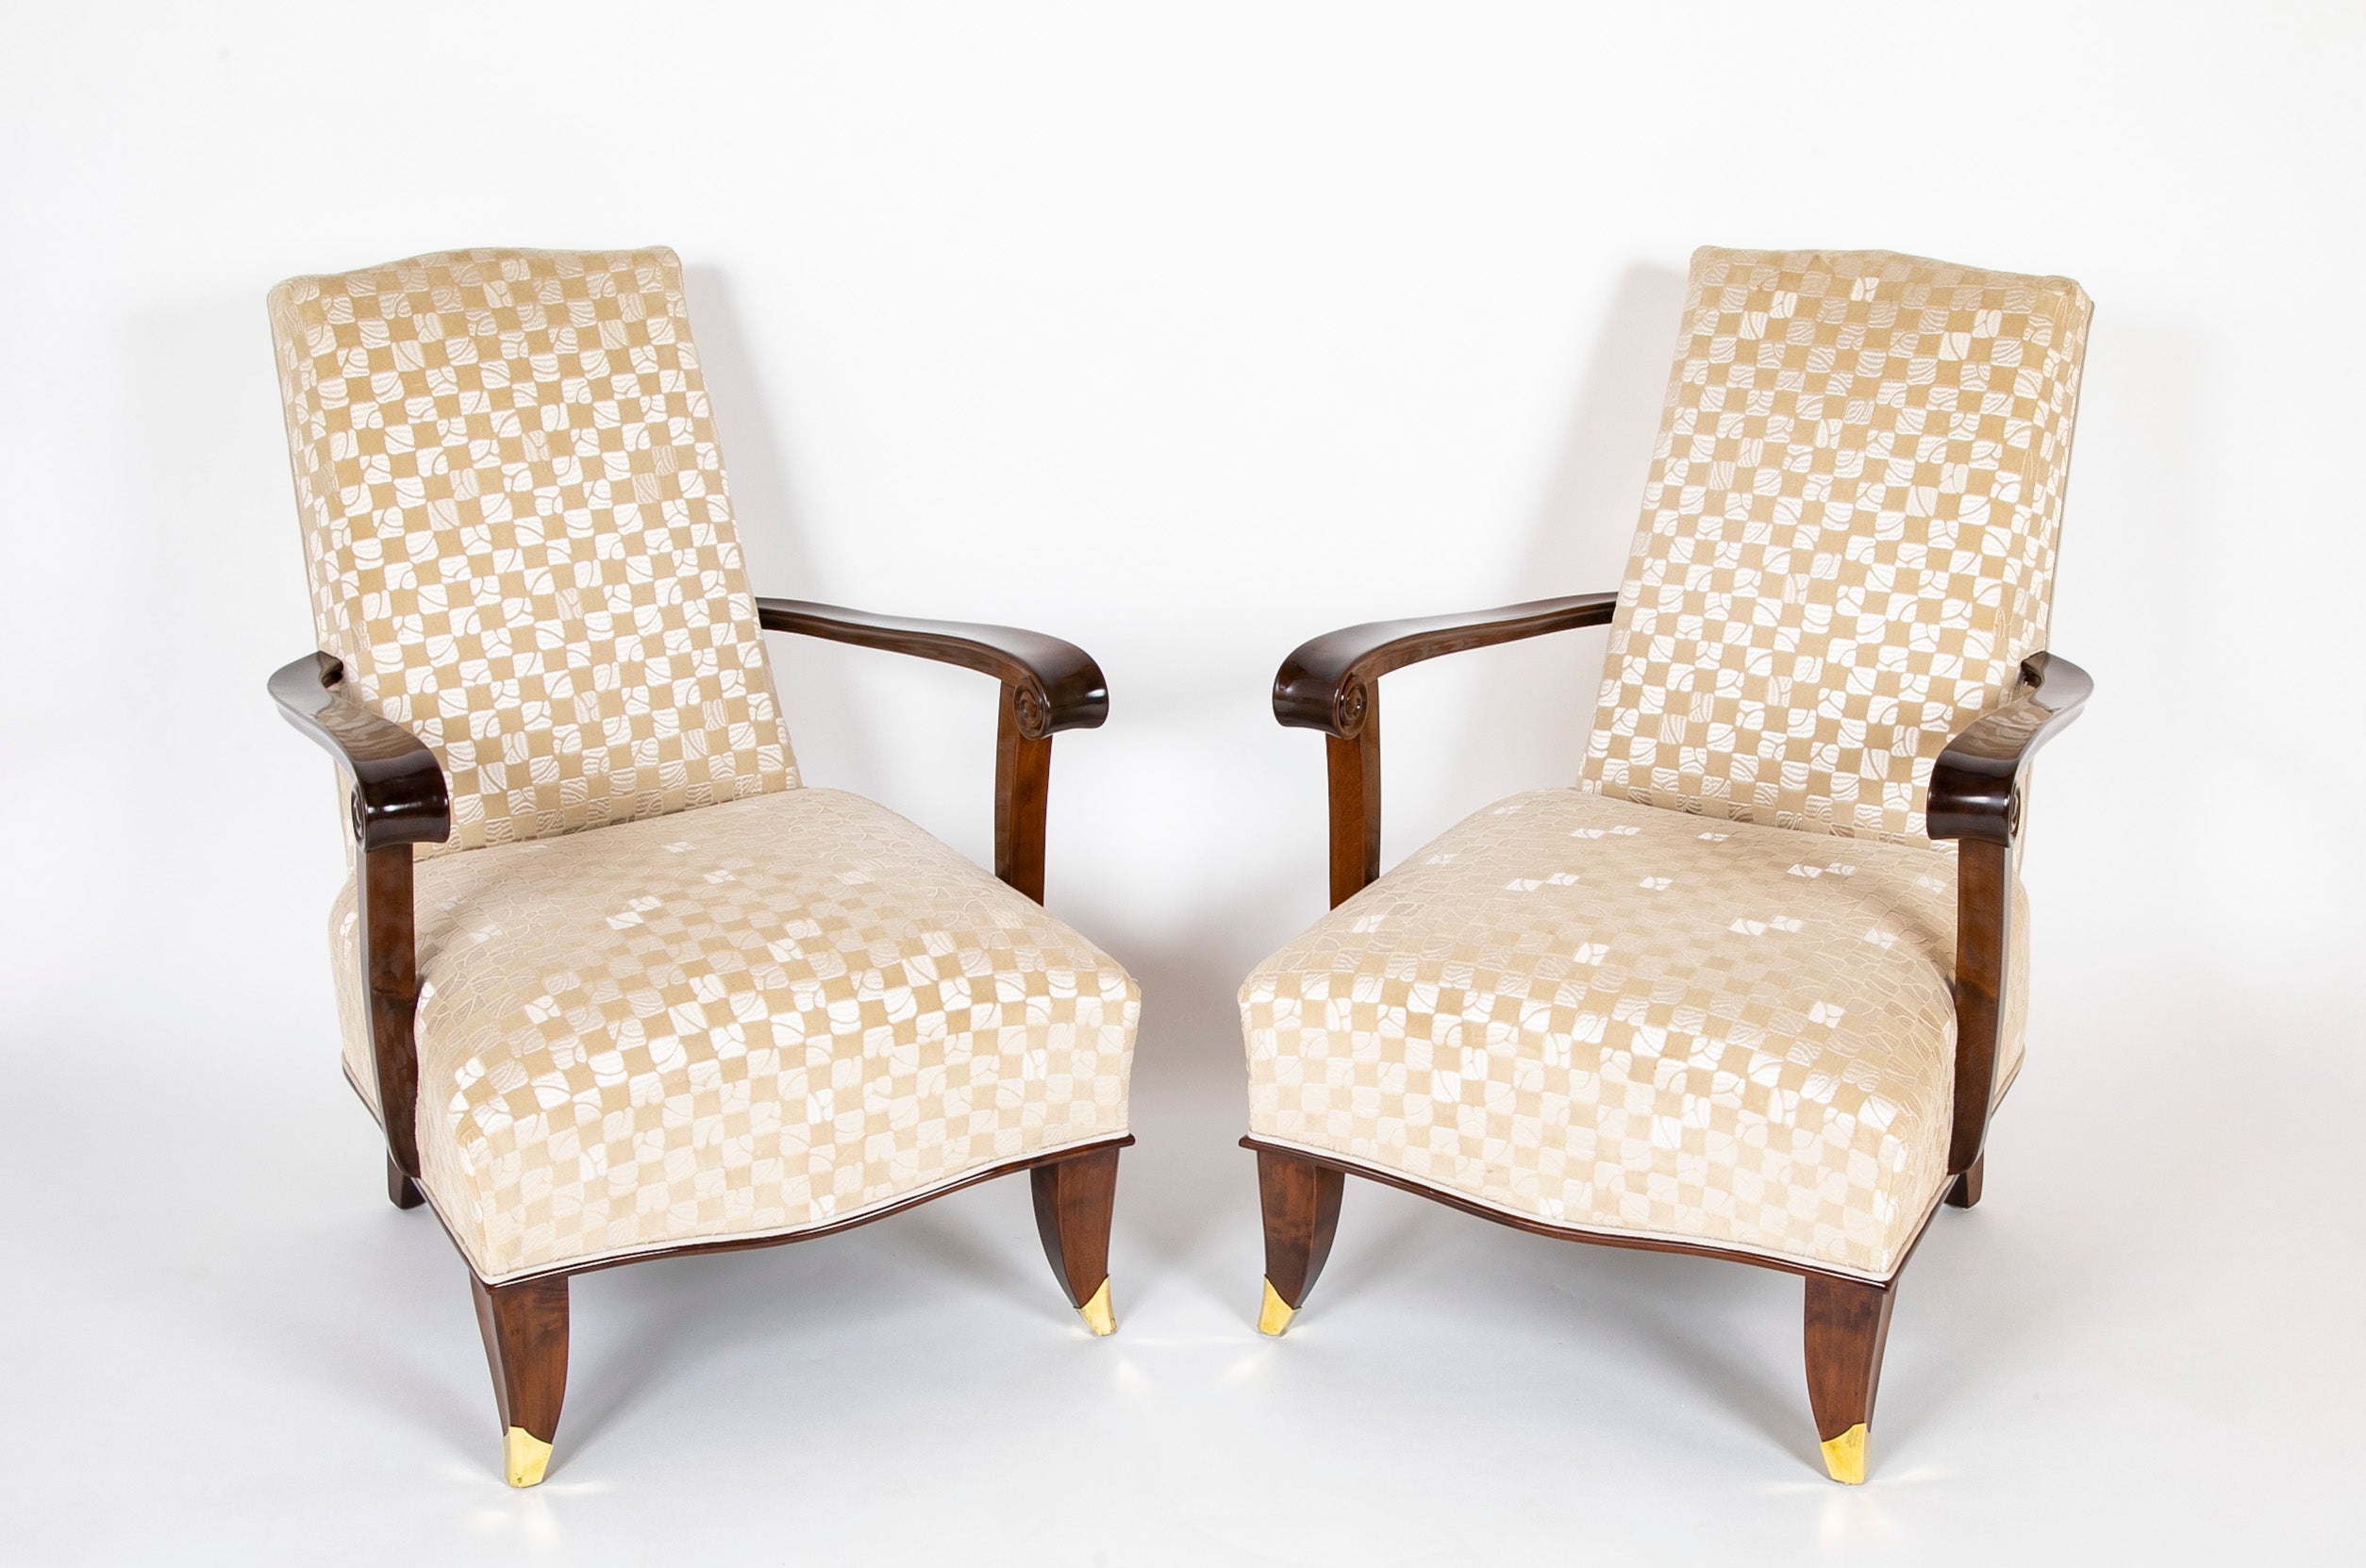 A Pair of French Upholstered Mahogany Armchairs with Scrolled Hand Grips & Bronze Sabots